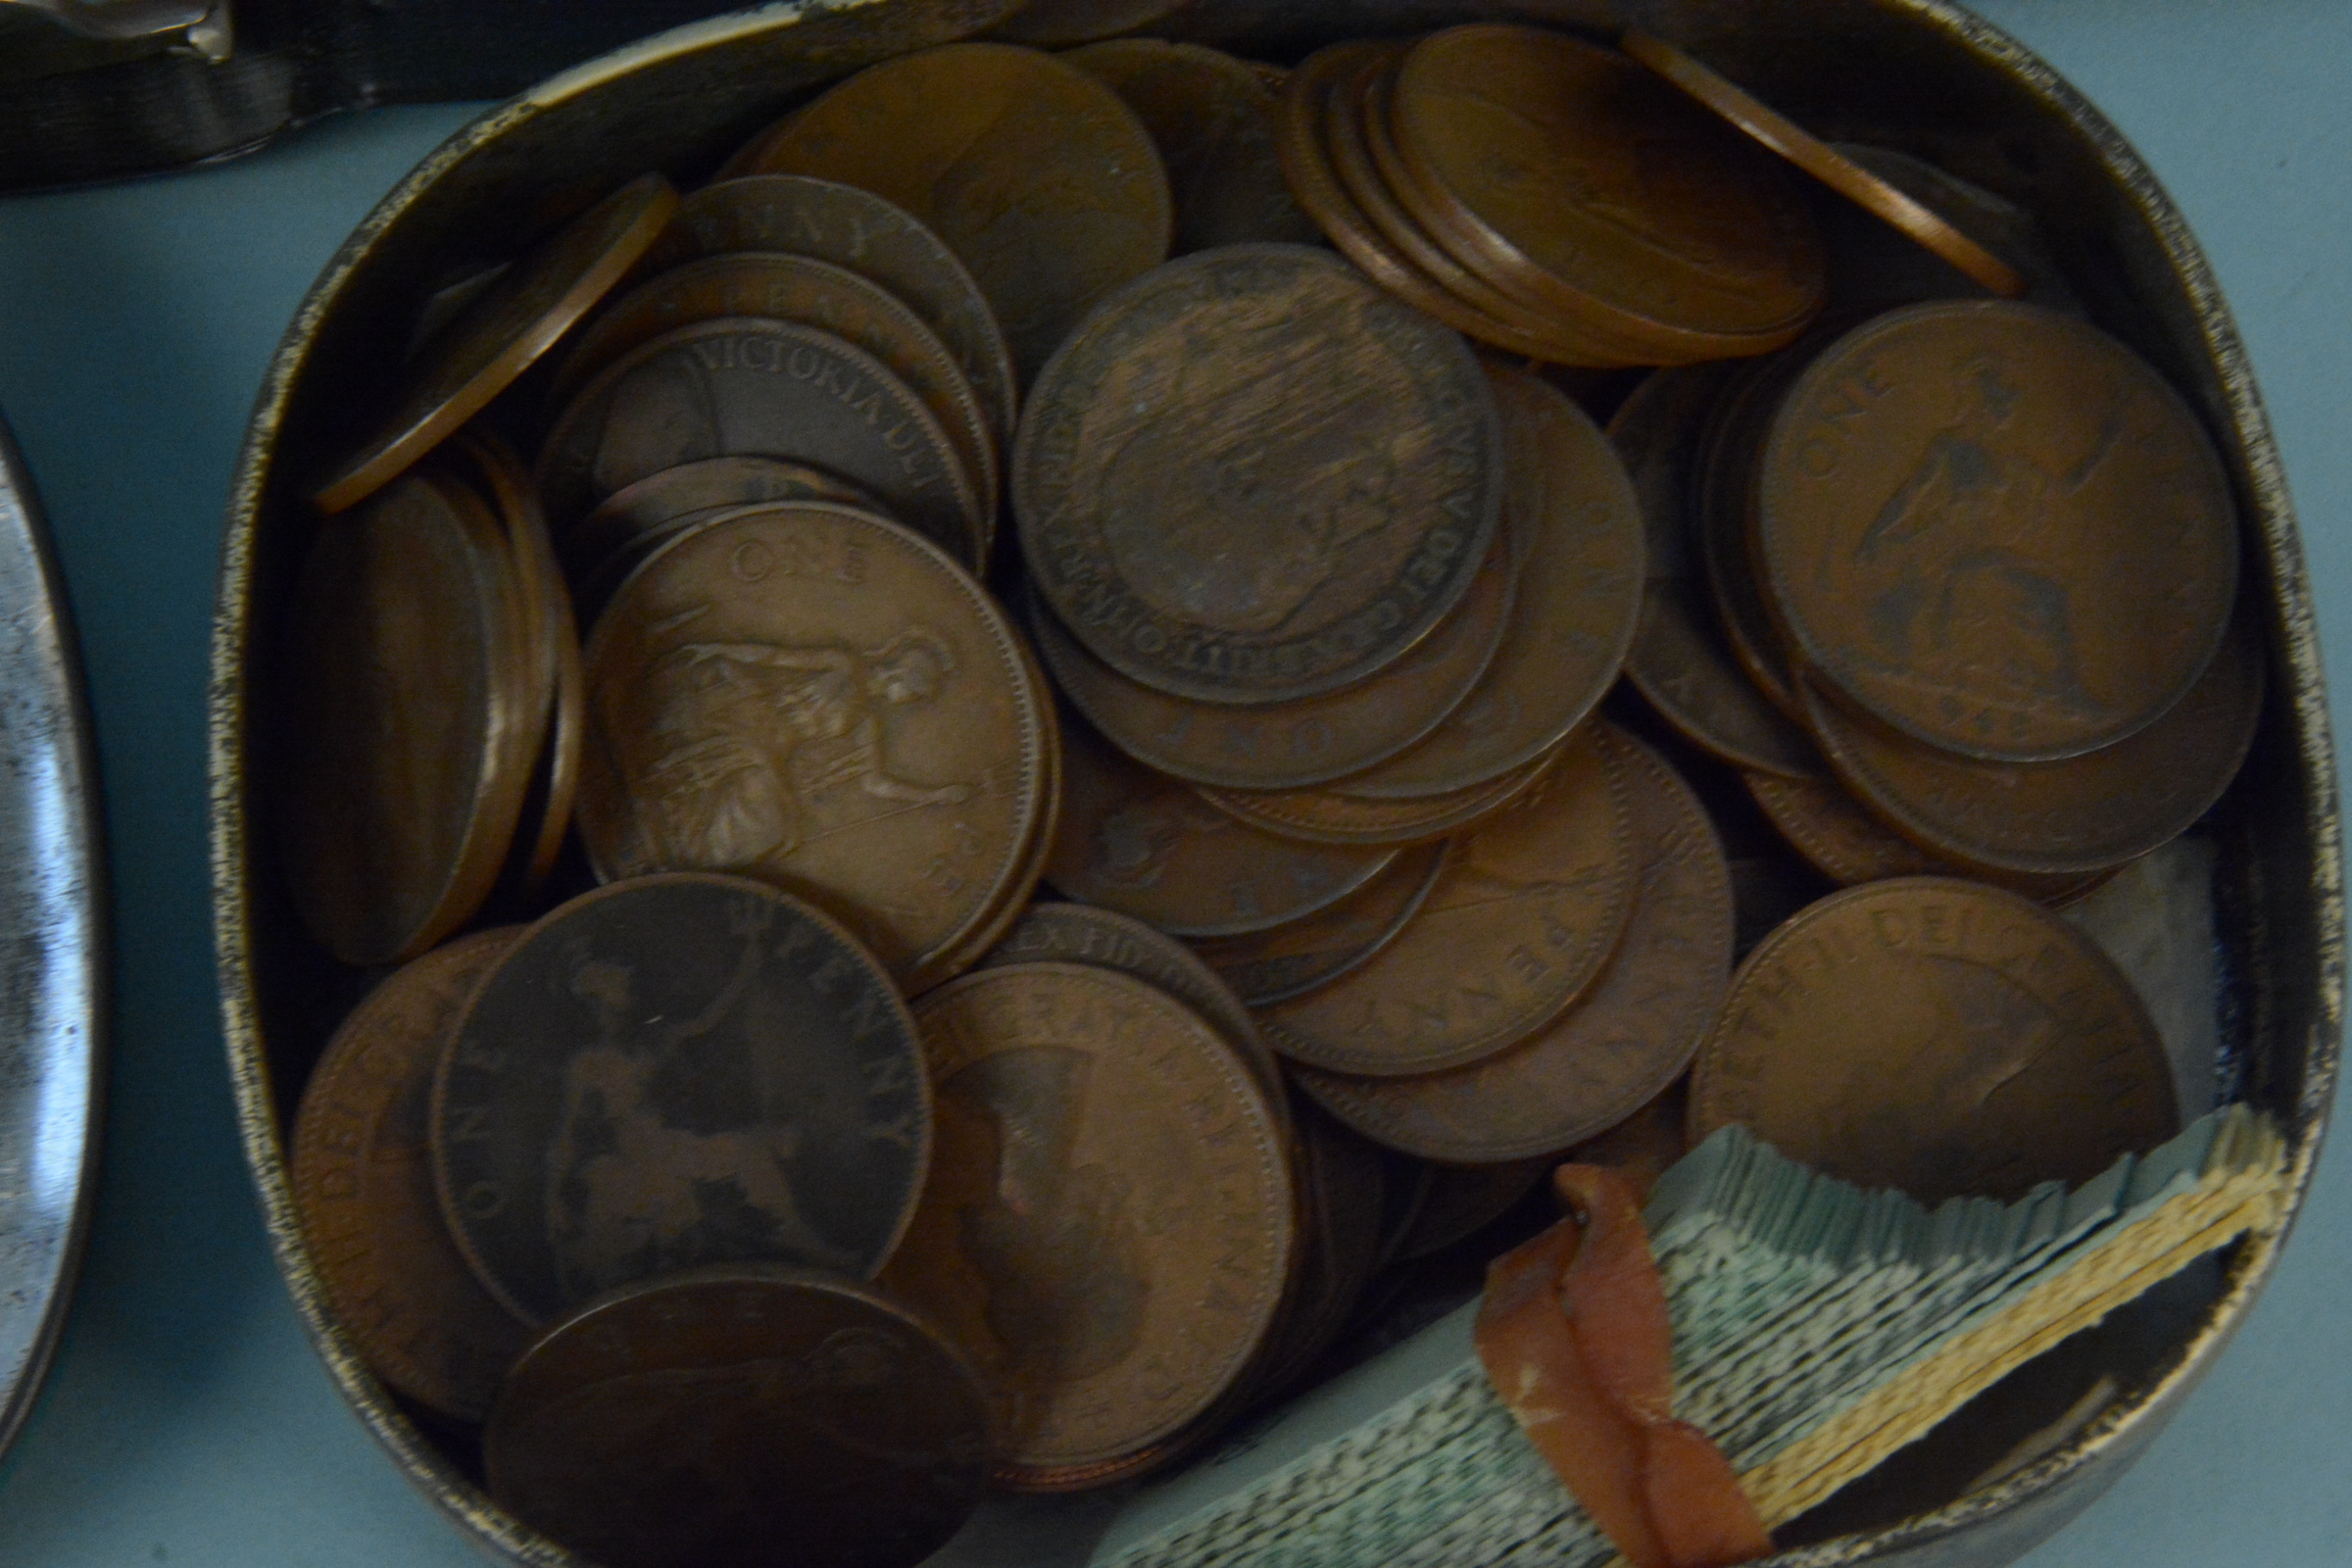 A folder containing British coins including some silver with old milled copper coins in a box plus - Image 3 of 3